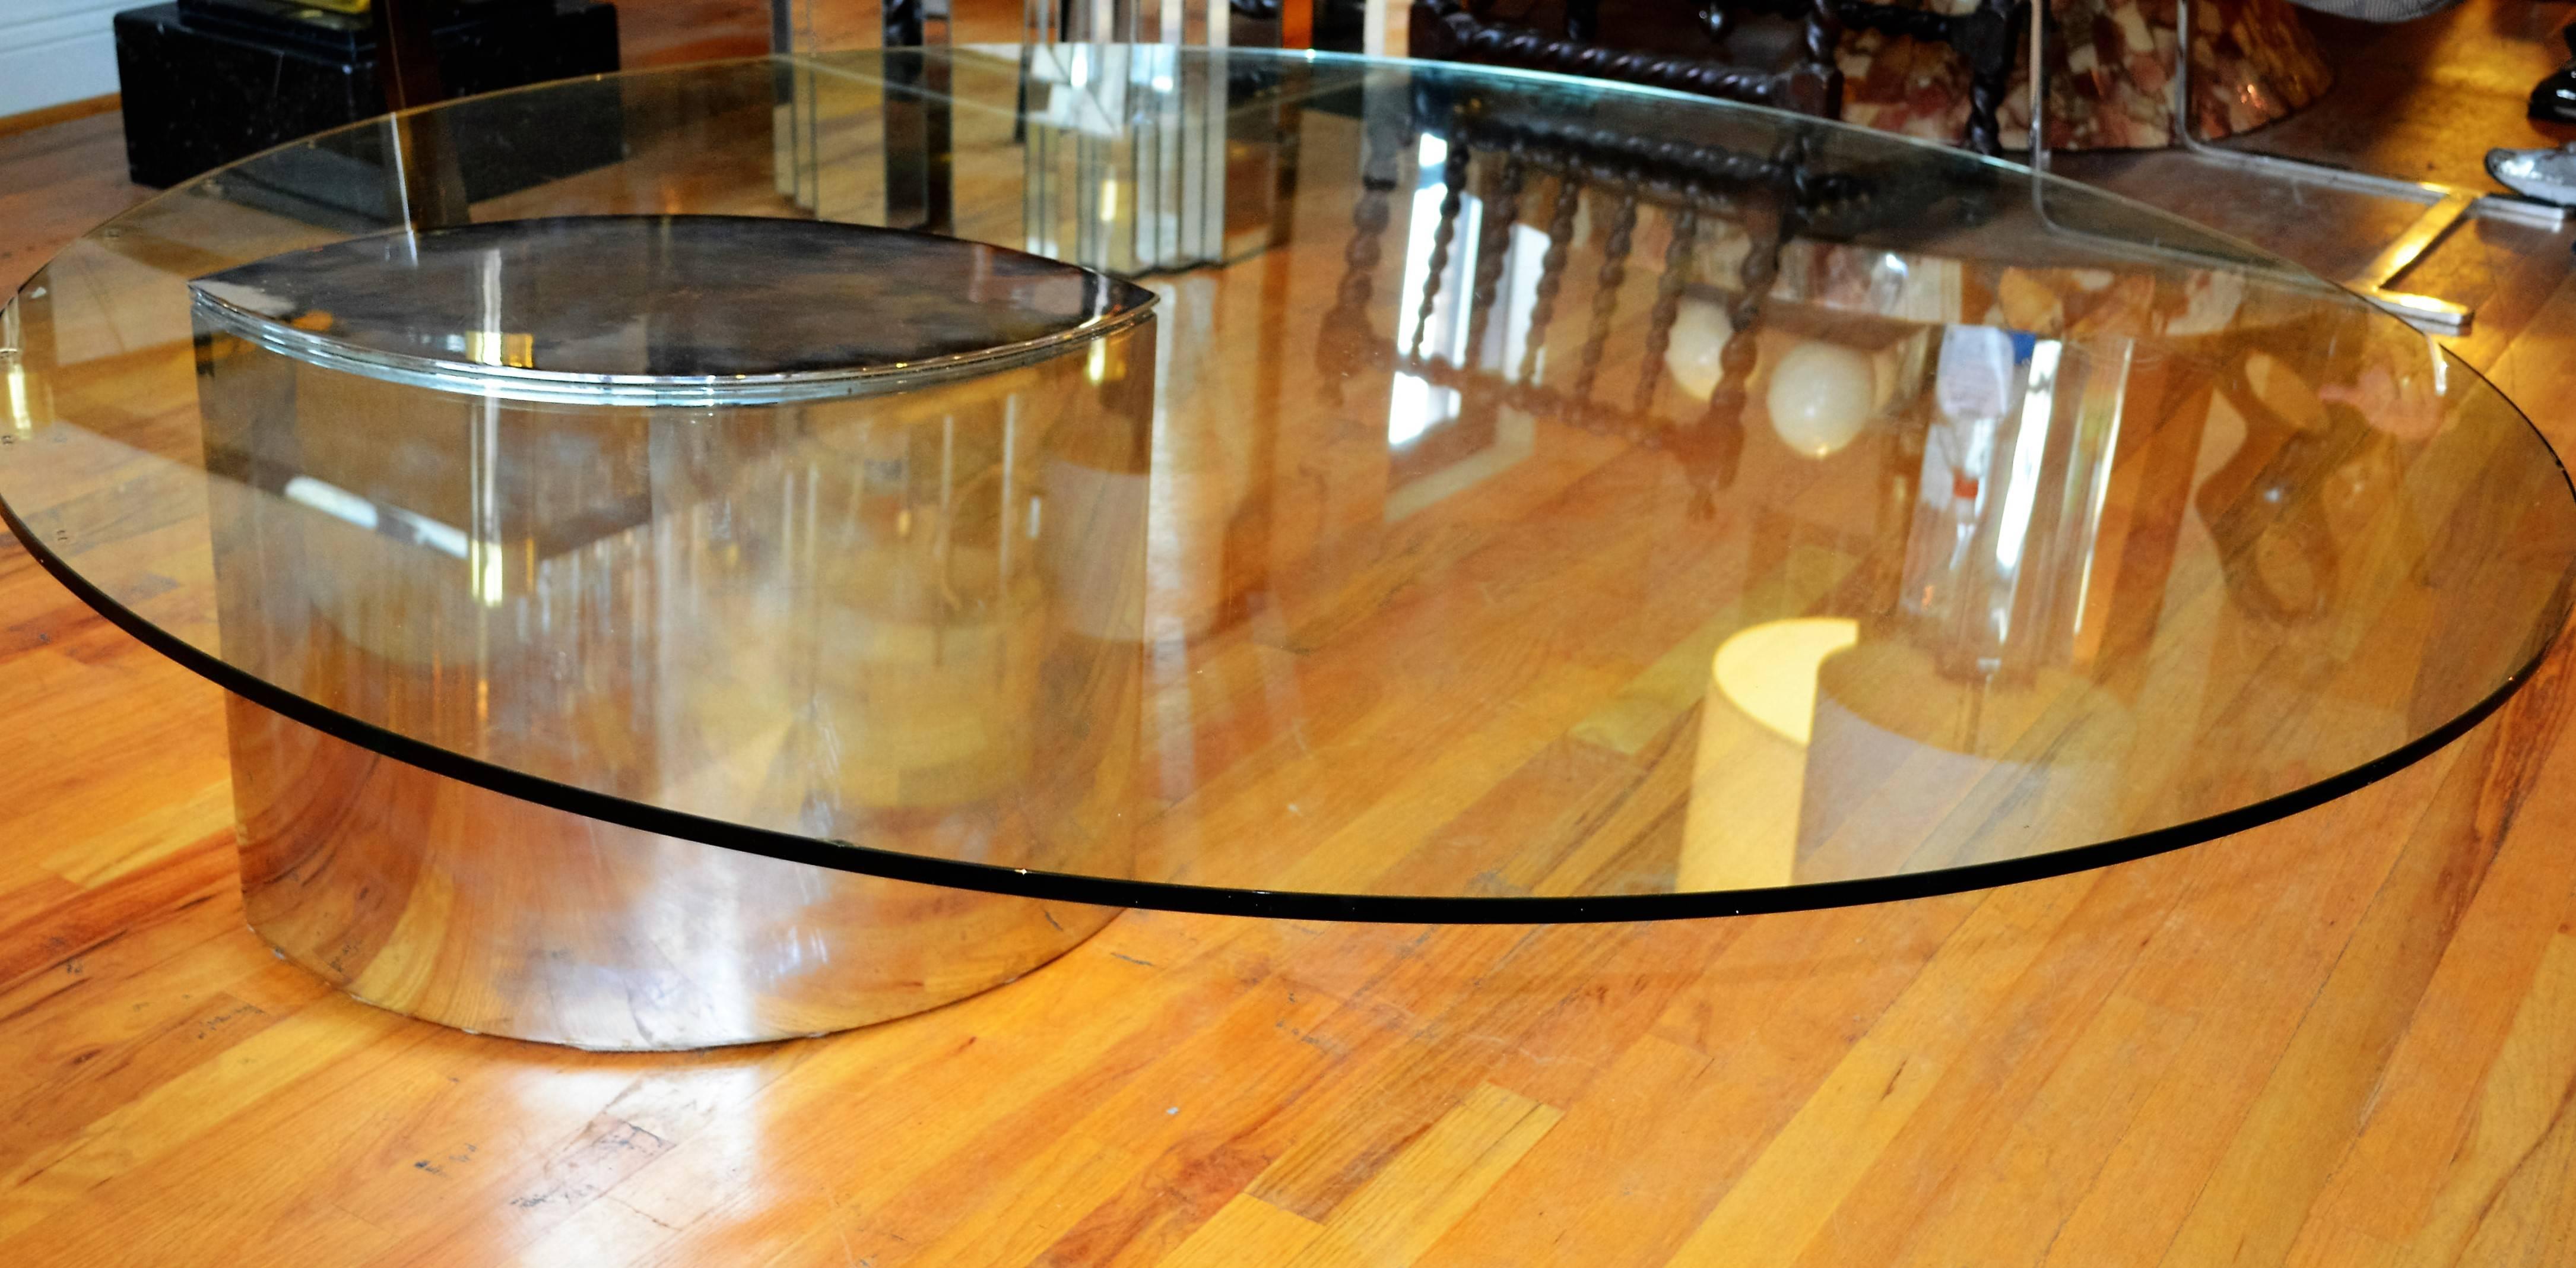 Vintage Lunario coffee table by Cini Boeri for Knoll International.
This modernist cantilevered coffee table features a large rare
59 inch round tempered glass top supported on a polished chrome plated
elliptical base.